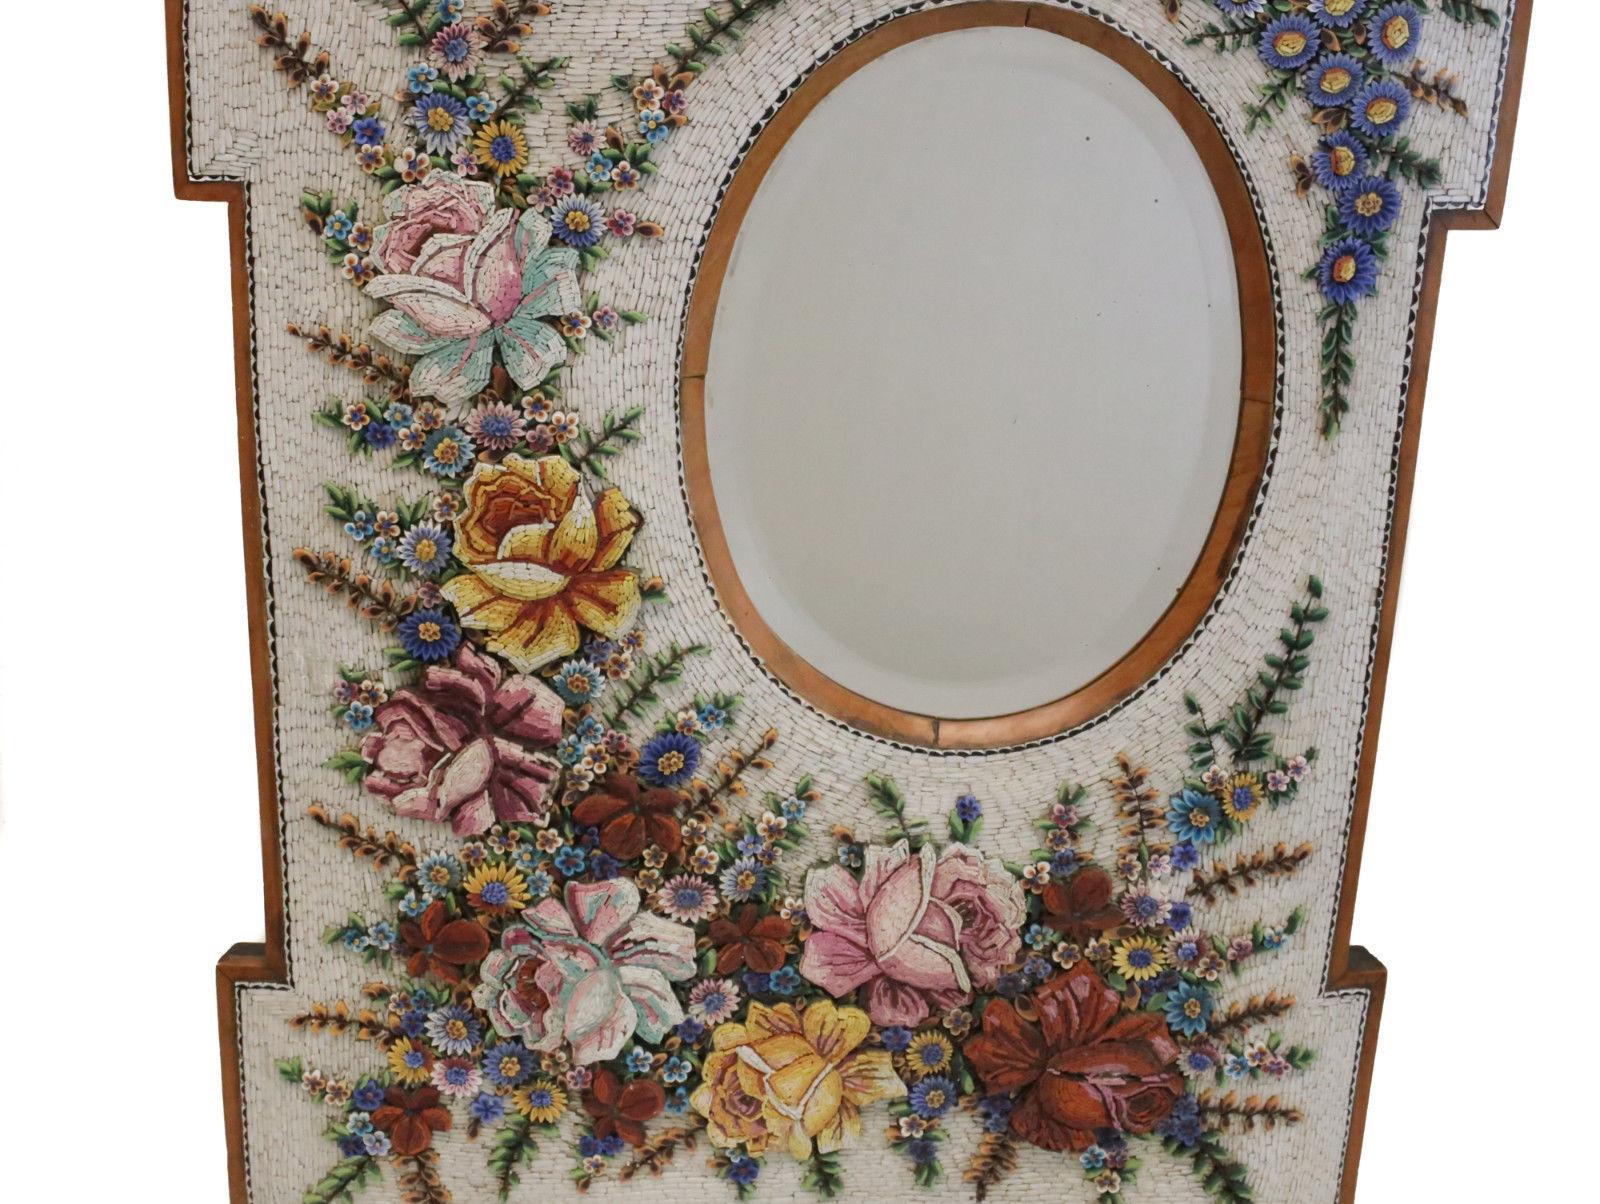 An exquisite antique Venetian micromosaic wall hanging mirror. The mirror has stunning micromosaic tiles depicting lovely floral designs. An oval shaped mirror to the upper right. Weight approximate, 15 lbs.



Measures approximate, Frame: